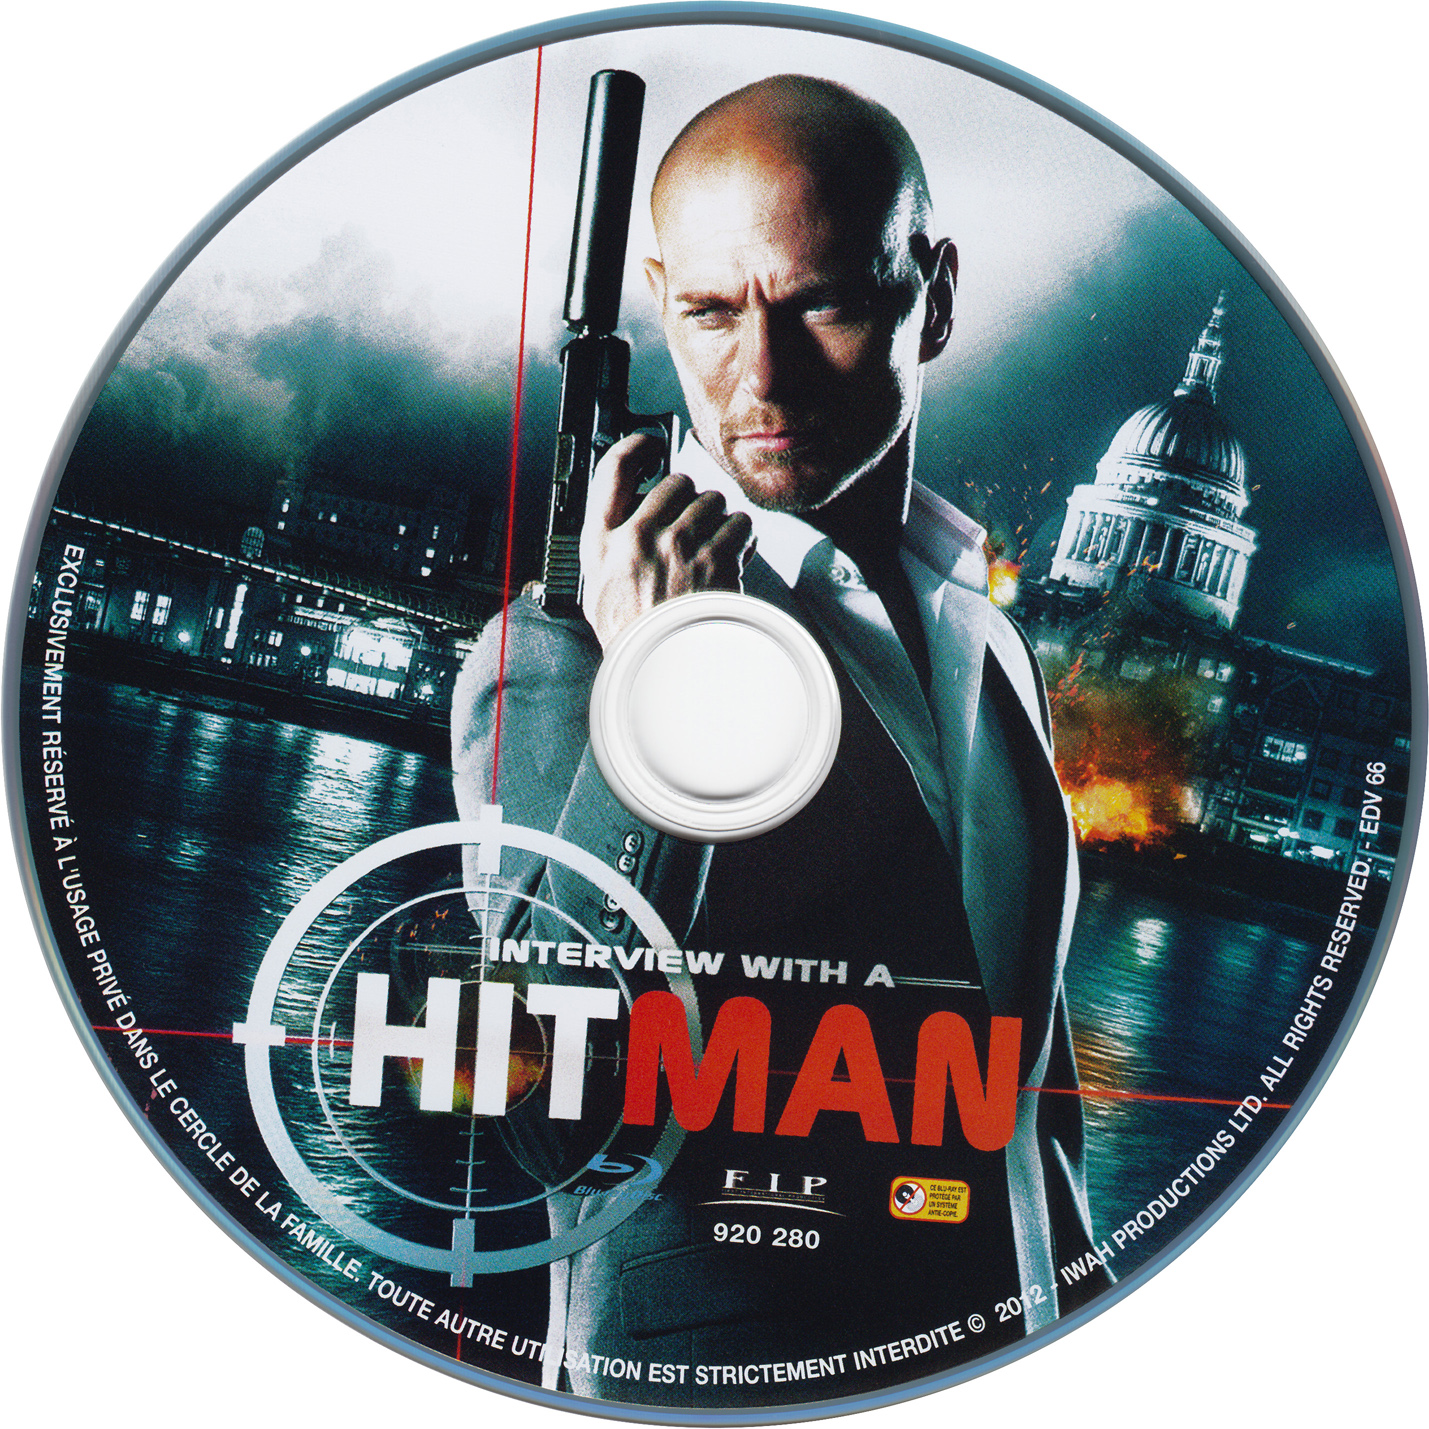 Interview with a hitman (BLU-RAY)